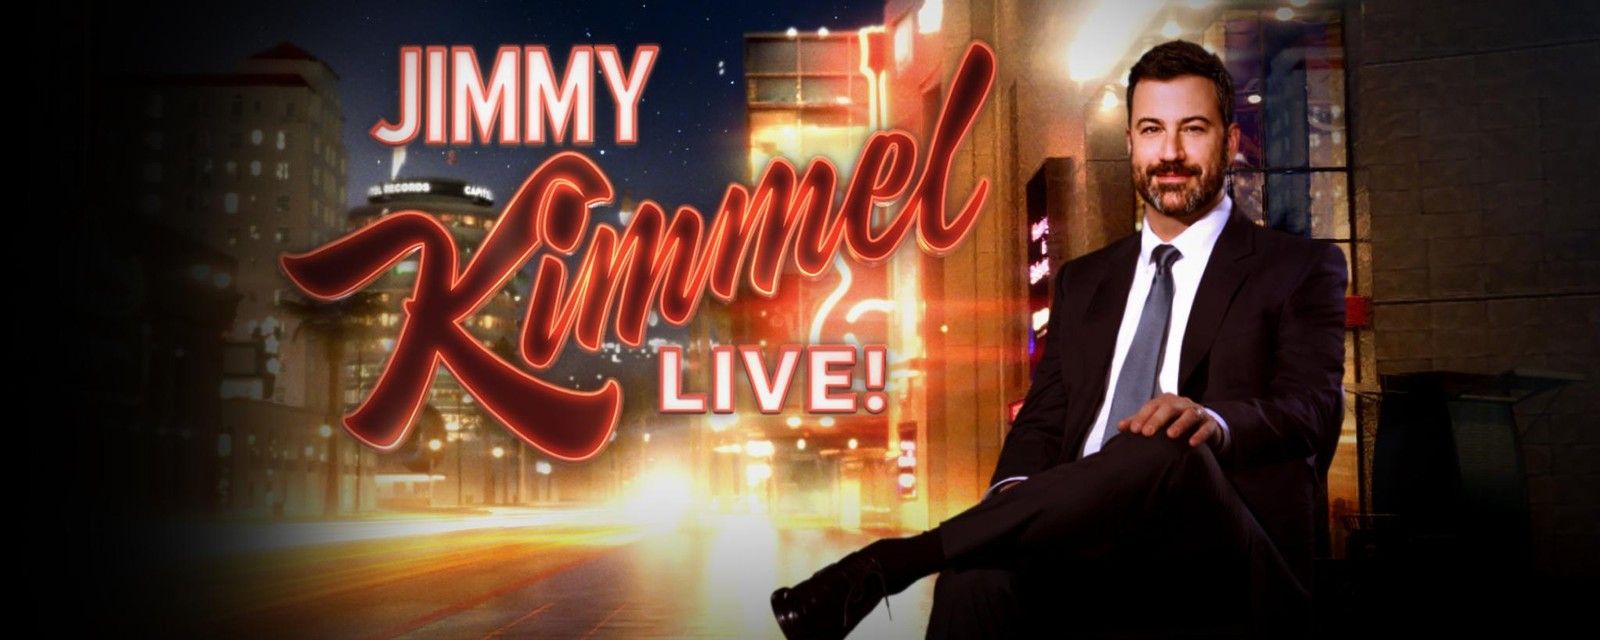 Jimmy Kimmel Set To Host Primetime ABC Special On ‘The Bachelor’